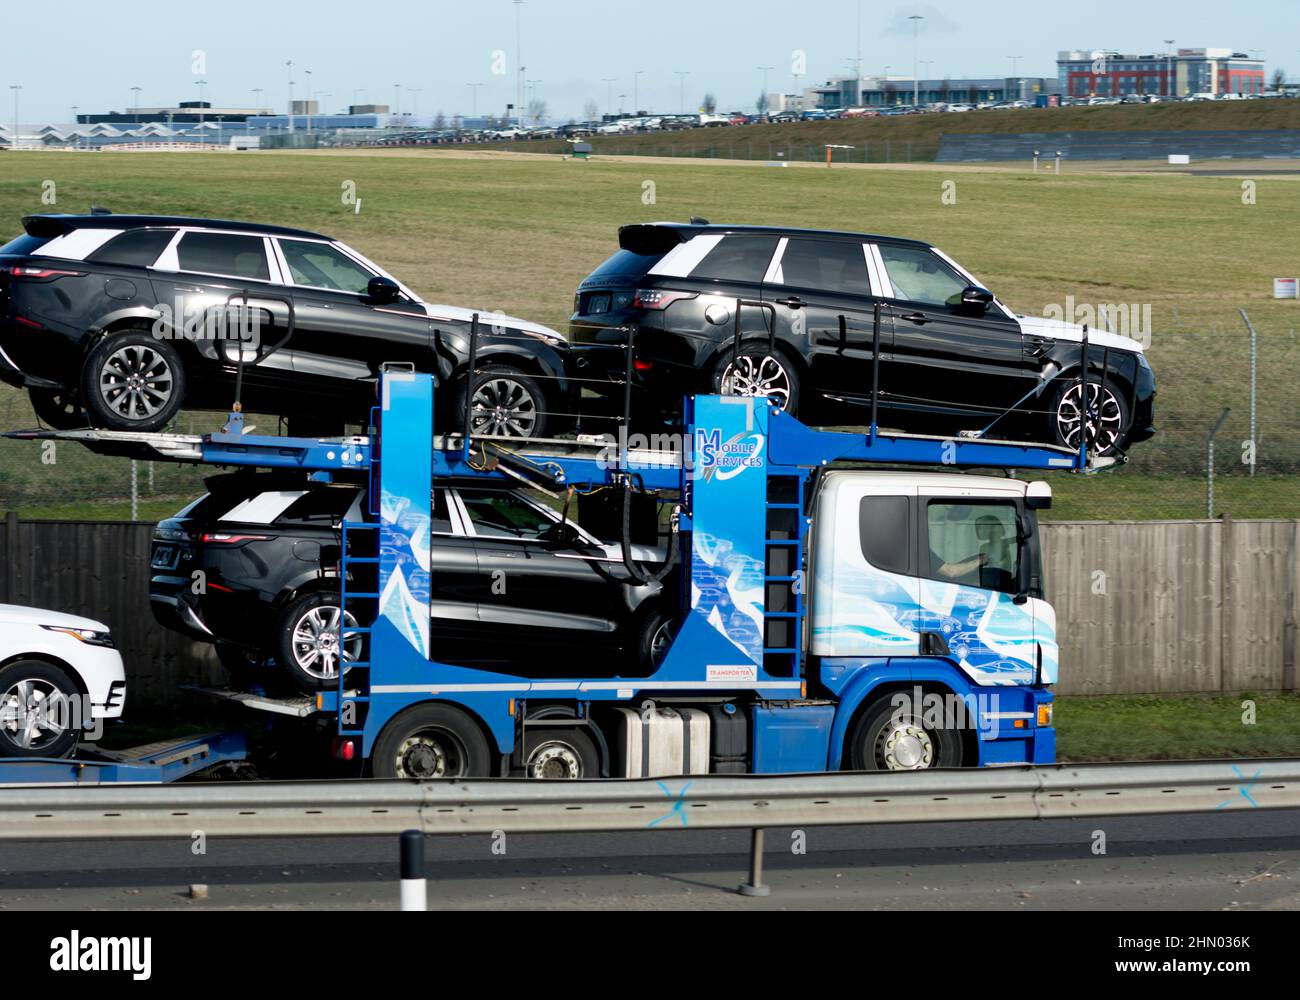 Mobile Services transporter lorry carrying new Land Rover cars, Birmingham, UK. Stock Photo